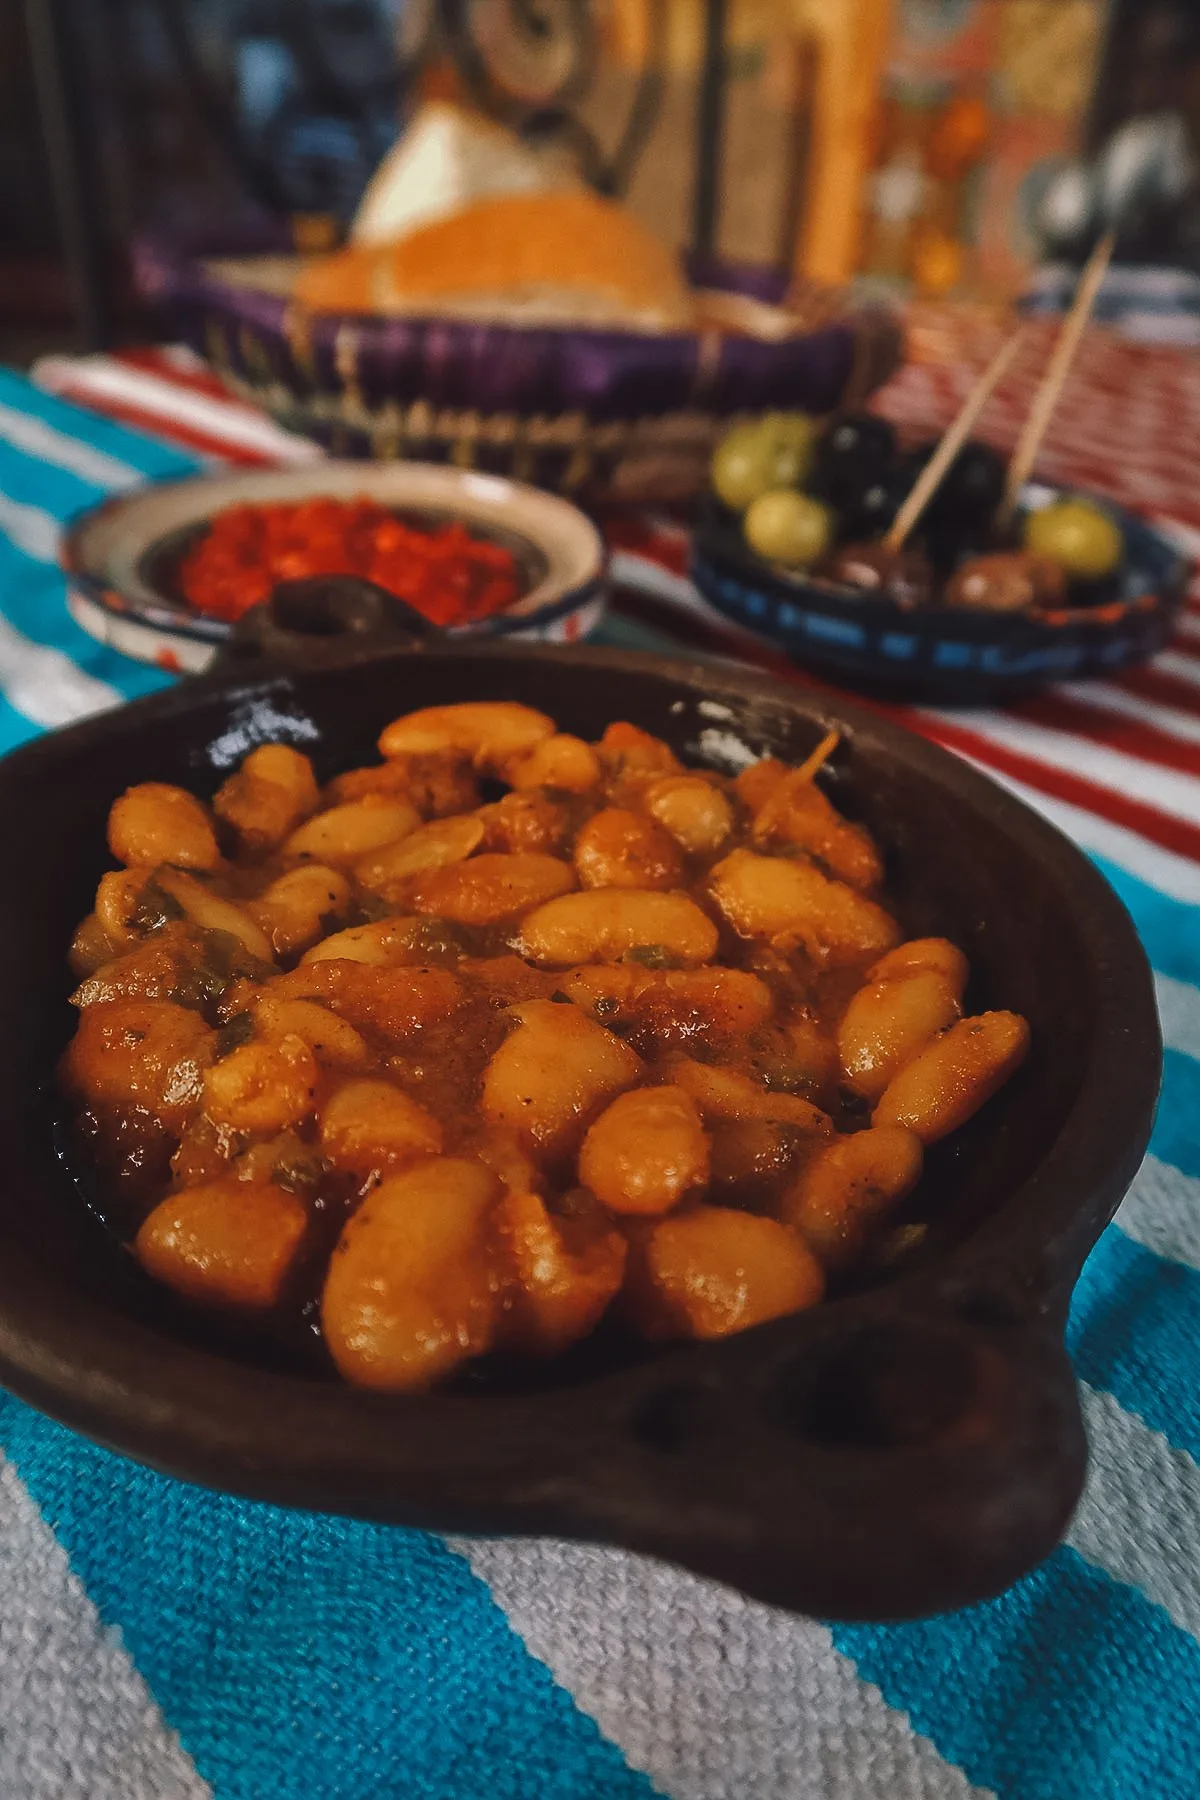 Bean stew at a restaurant in Tangier